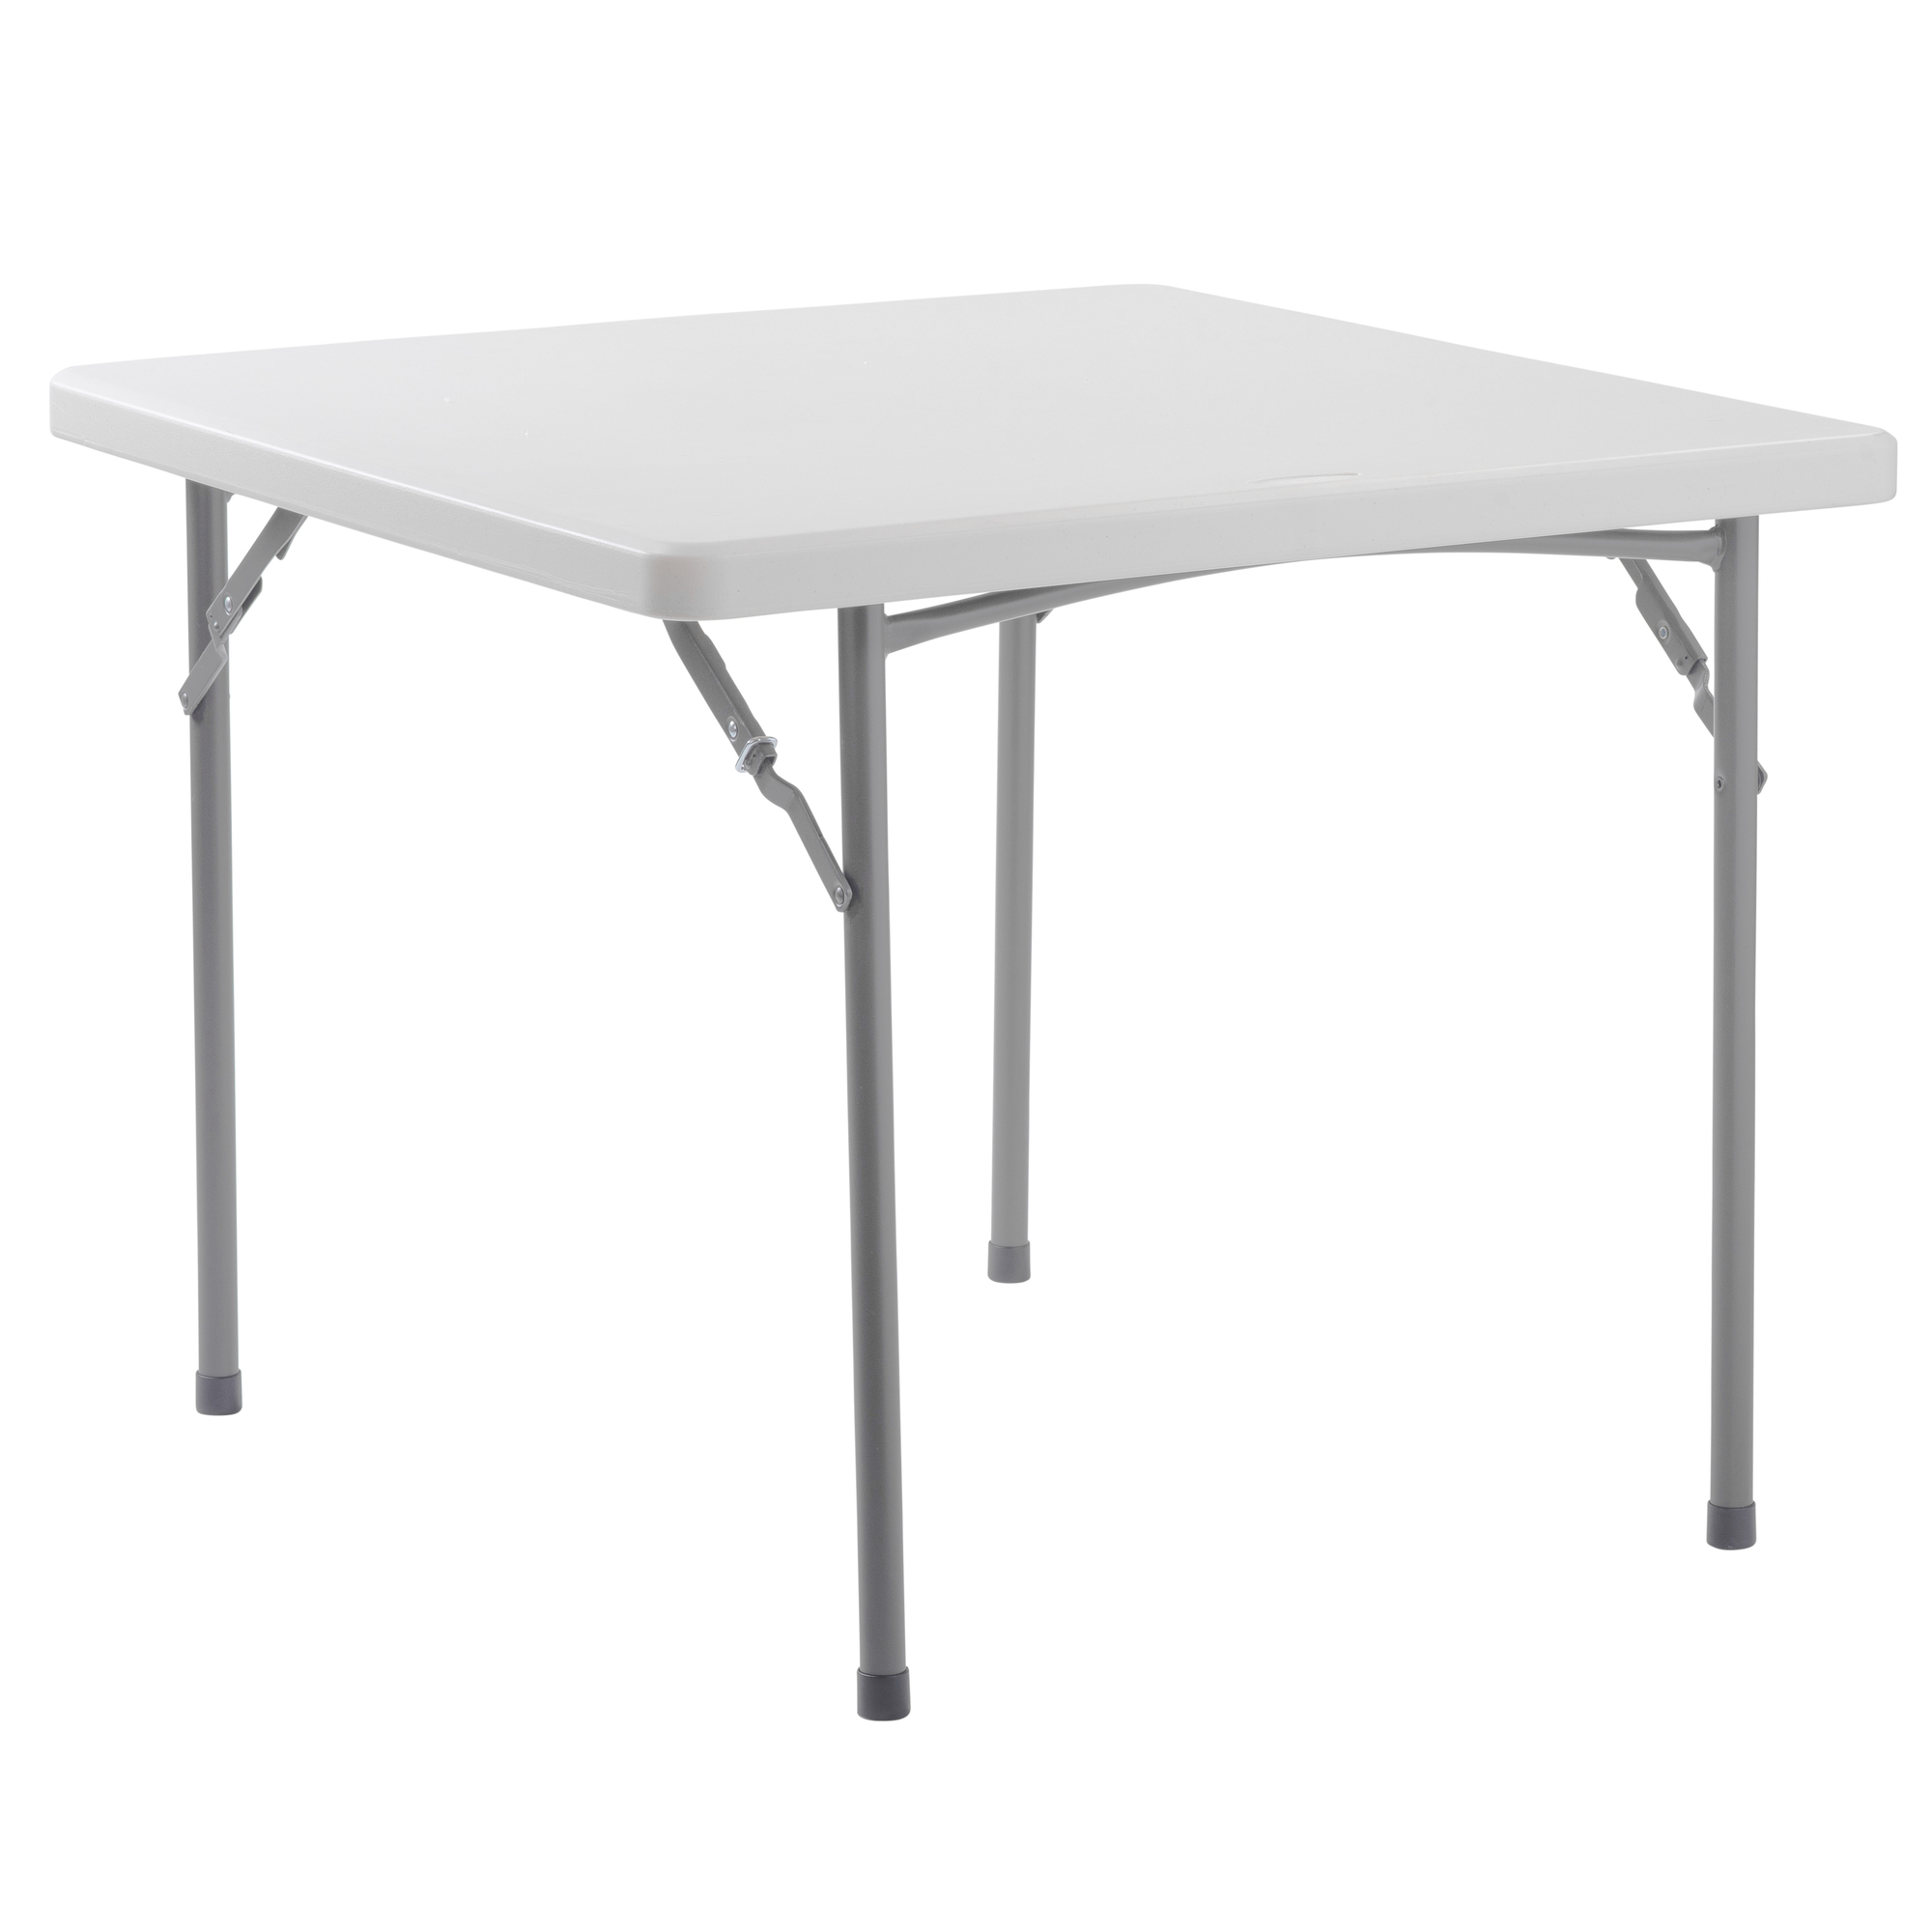 National Public Seating, Heavy Duty Folding Table, Height 29.5 in, Model BT3636